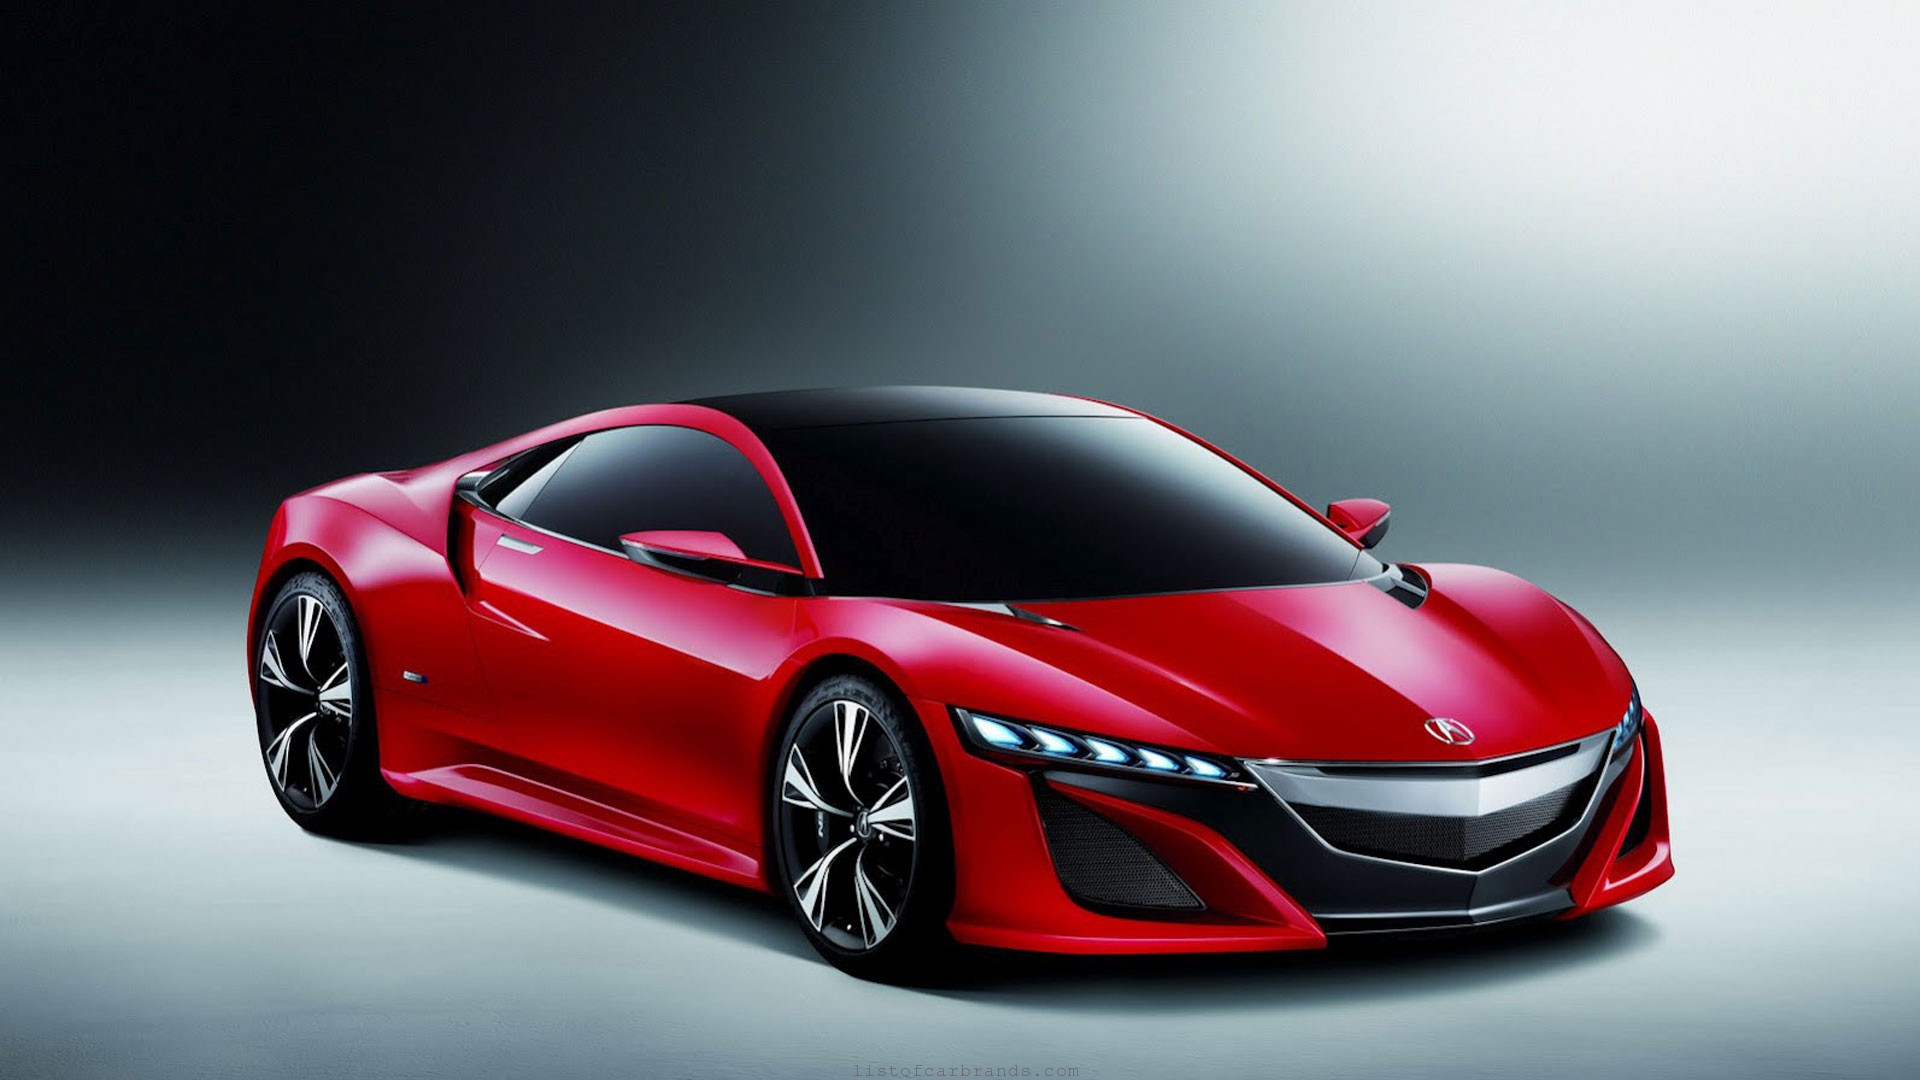  Nsx Wallpaper Widescreen is provided with high quality resolution for